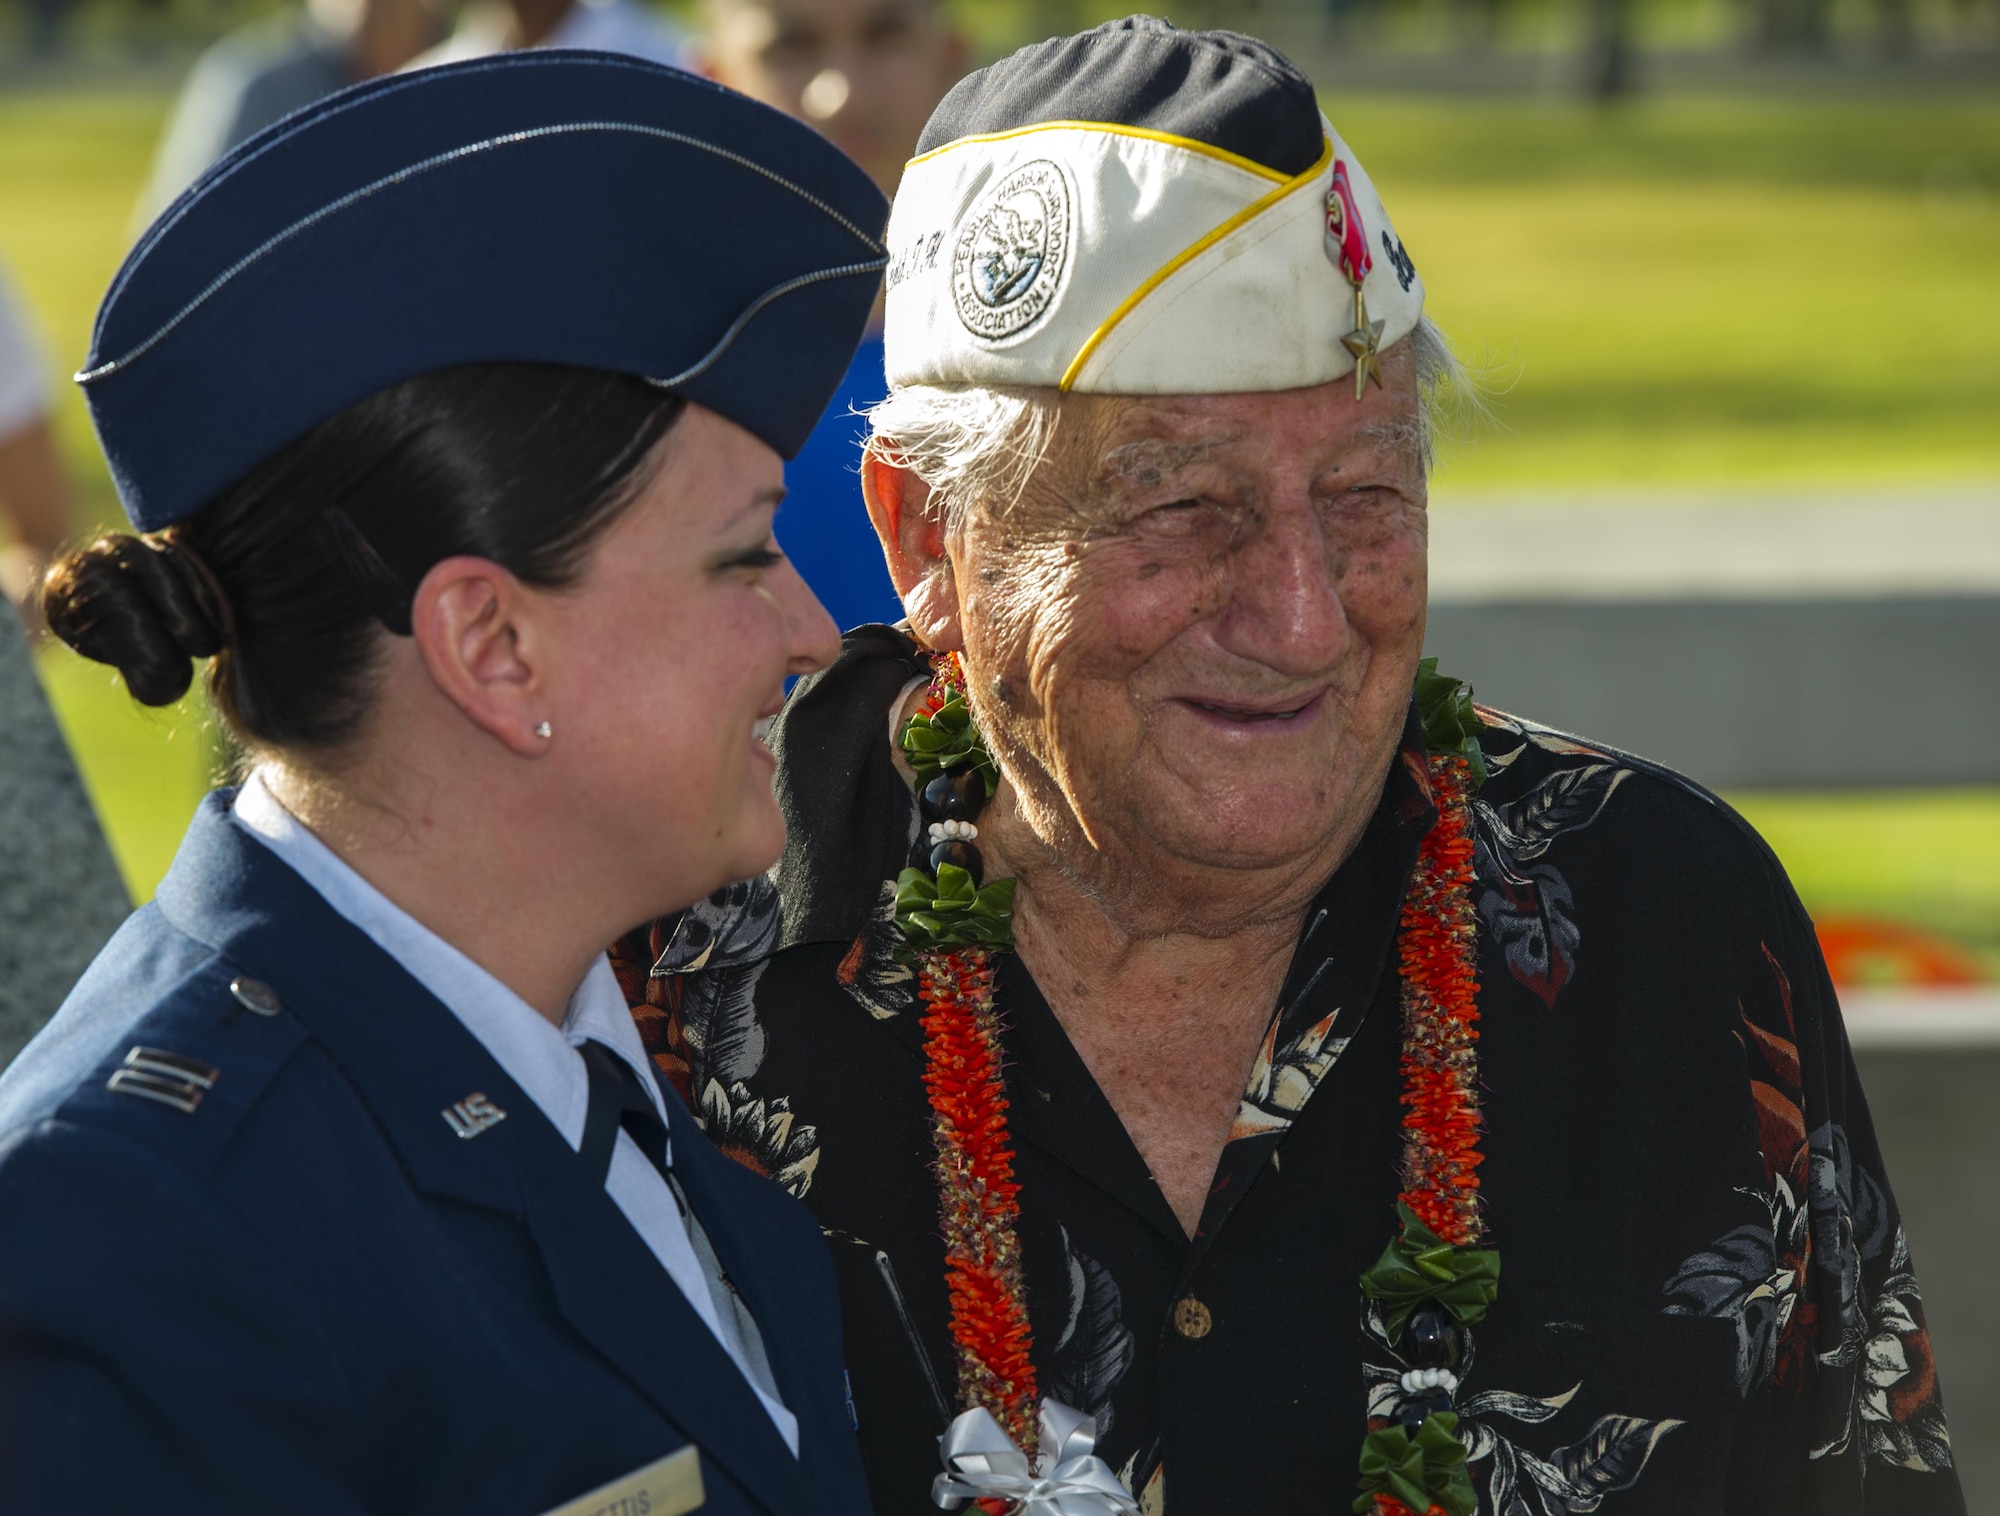 Capt. Kimber Nettis, 515th Air Mobility Operation Wing Cyberspace Operations chief, smiles with Command Sgt. Maj. Armando Galella, a veteran who lost his best friend during the Dec. 7, 1941 attacks on Oahu, during a photo-opportunity session after the 75th Commemoration of the Dec. 7, 1941 attack on Hickam Field ceremony Dec. 7, 2016, at Joint Base Pearl Harbor-Hickam, Hawaii. The attacks on seven bases throughout Oahu precipitated America's entry into World War II, and the annual commemoration ceremony is designed to foster reflection, remembrance, and understanding for those affected by the events that took place 75 years ago. (U.S. Air Force photo by Tech. Sgt. Nathan Allen)